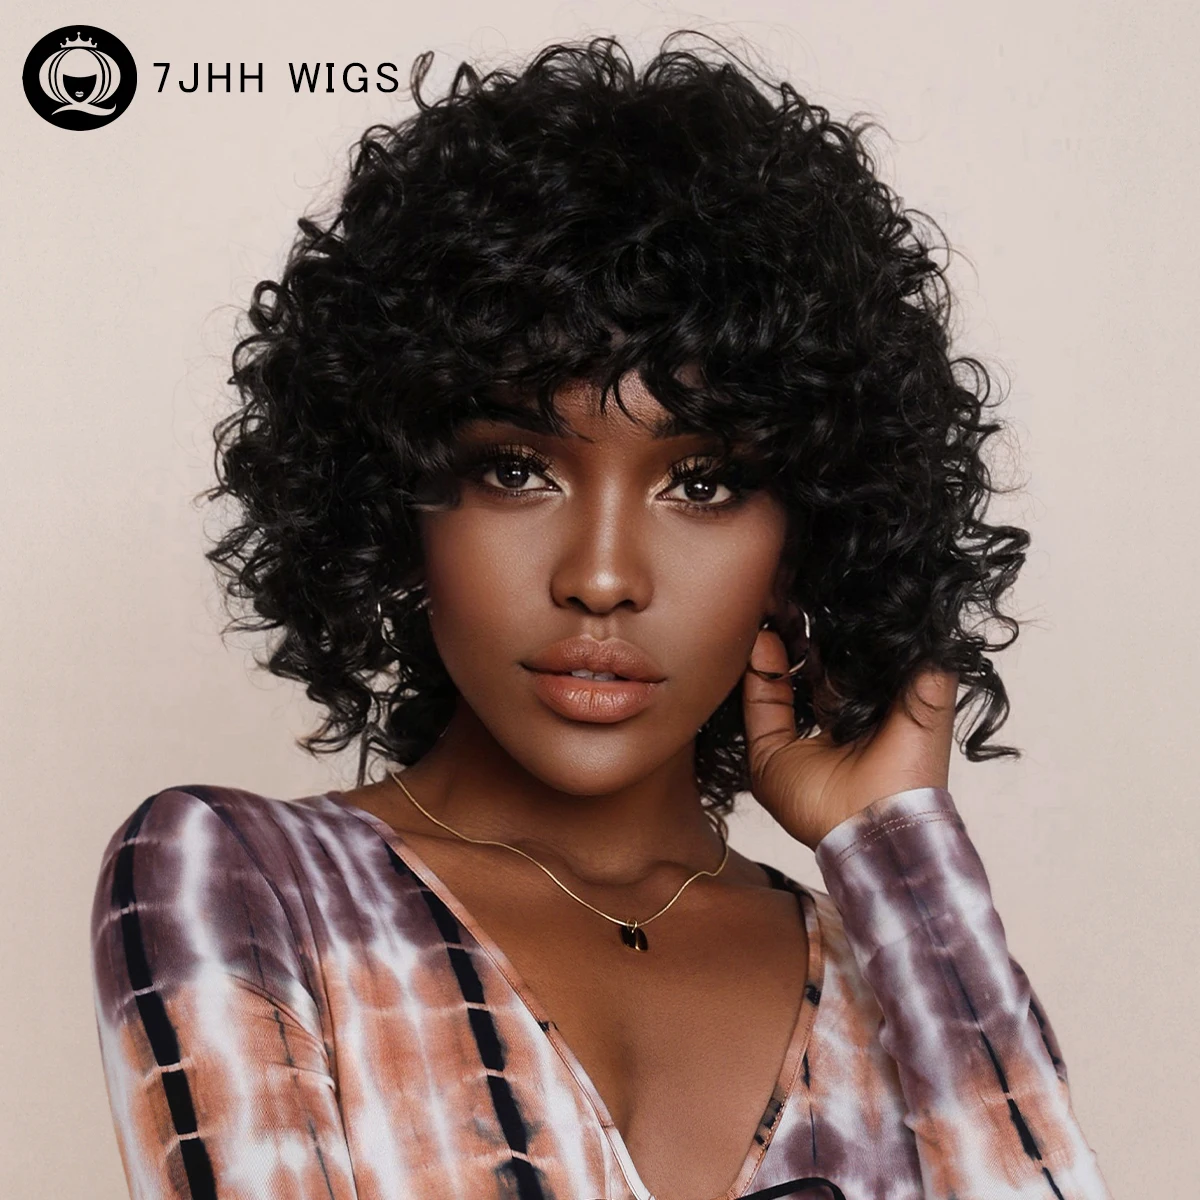 

7JHH WIGS Afro Kinky Curly Wig for Black Women Daily Cosplay Long Black Wavy Synthetic Wigs Heat Resistant Hair Natural Wig